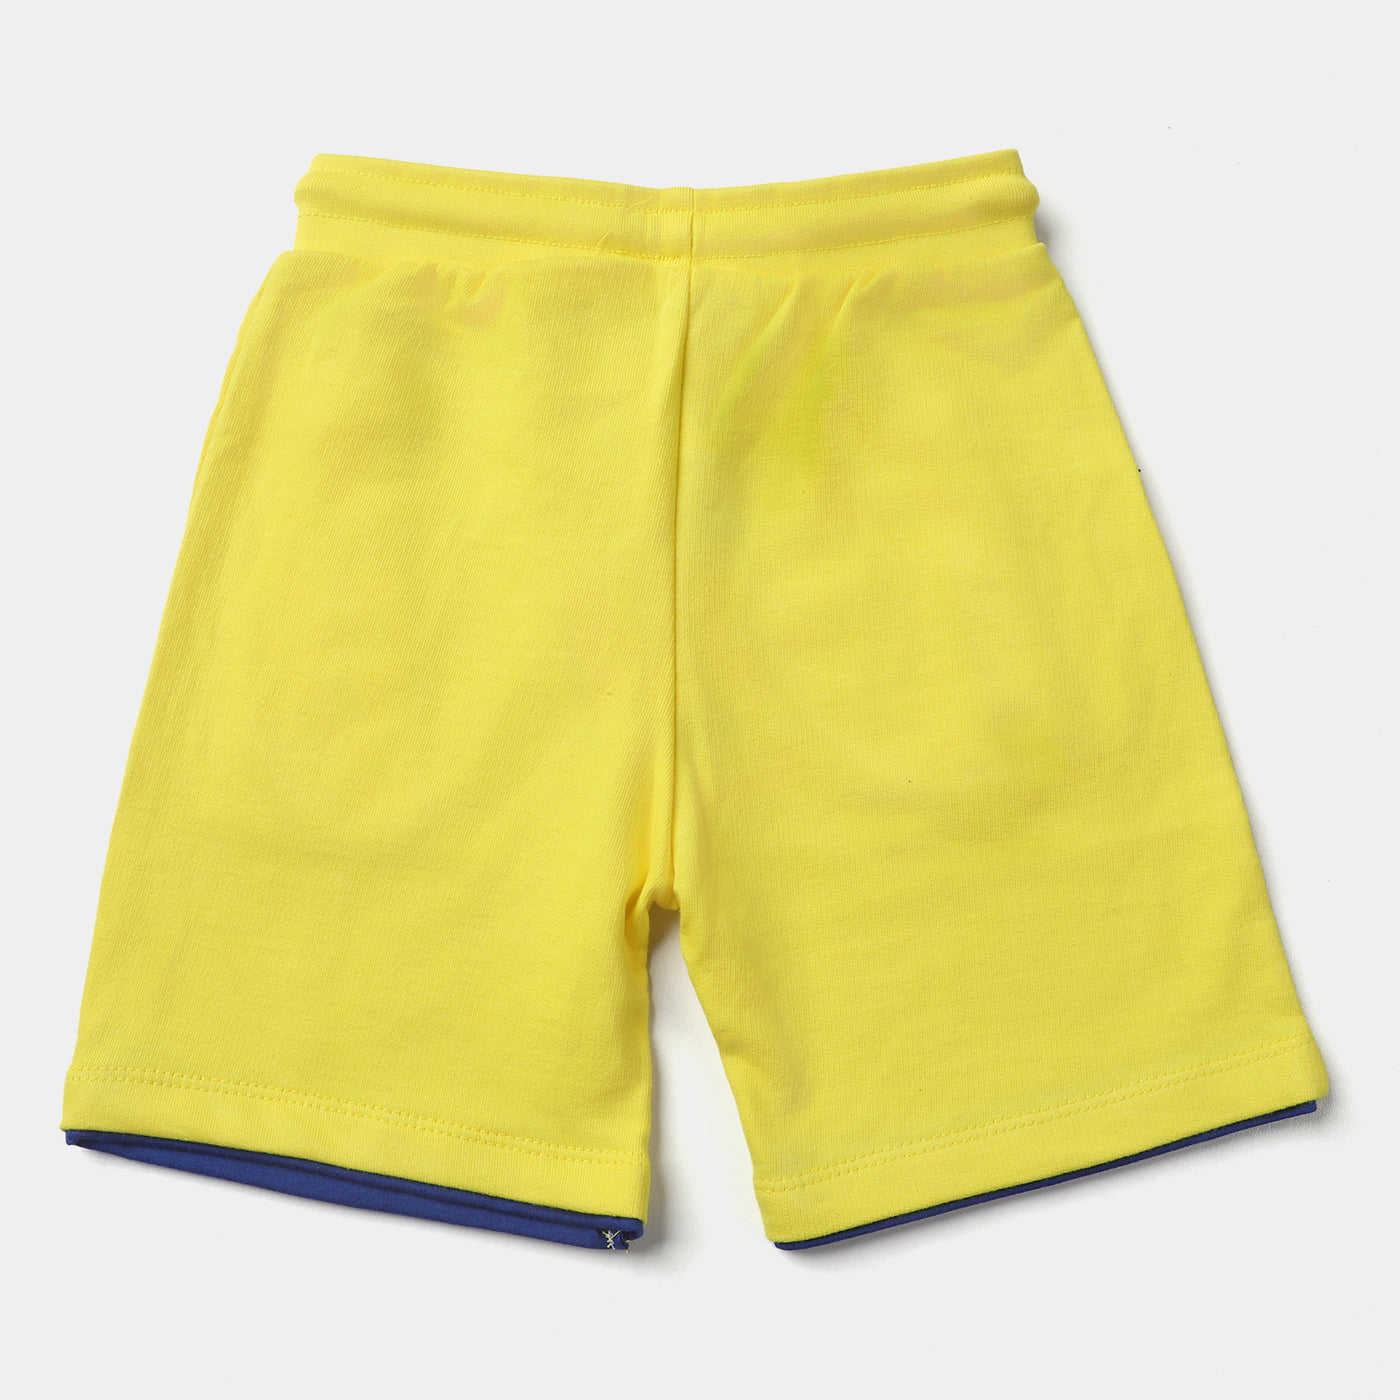 Boys Cotton Terry Knitted Short 35-B.Yellow